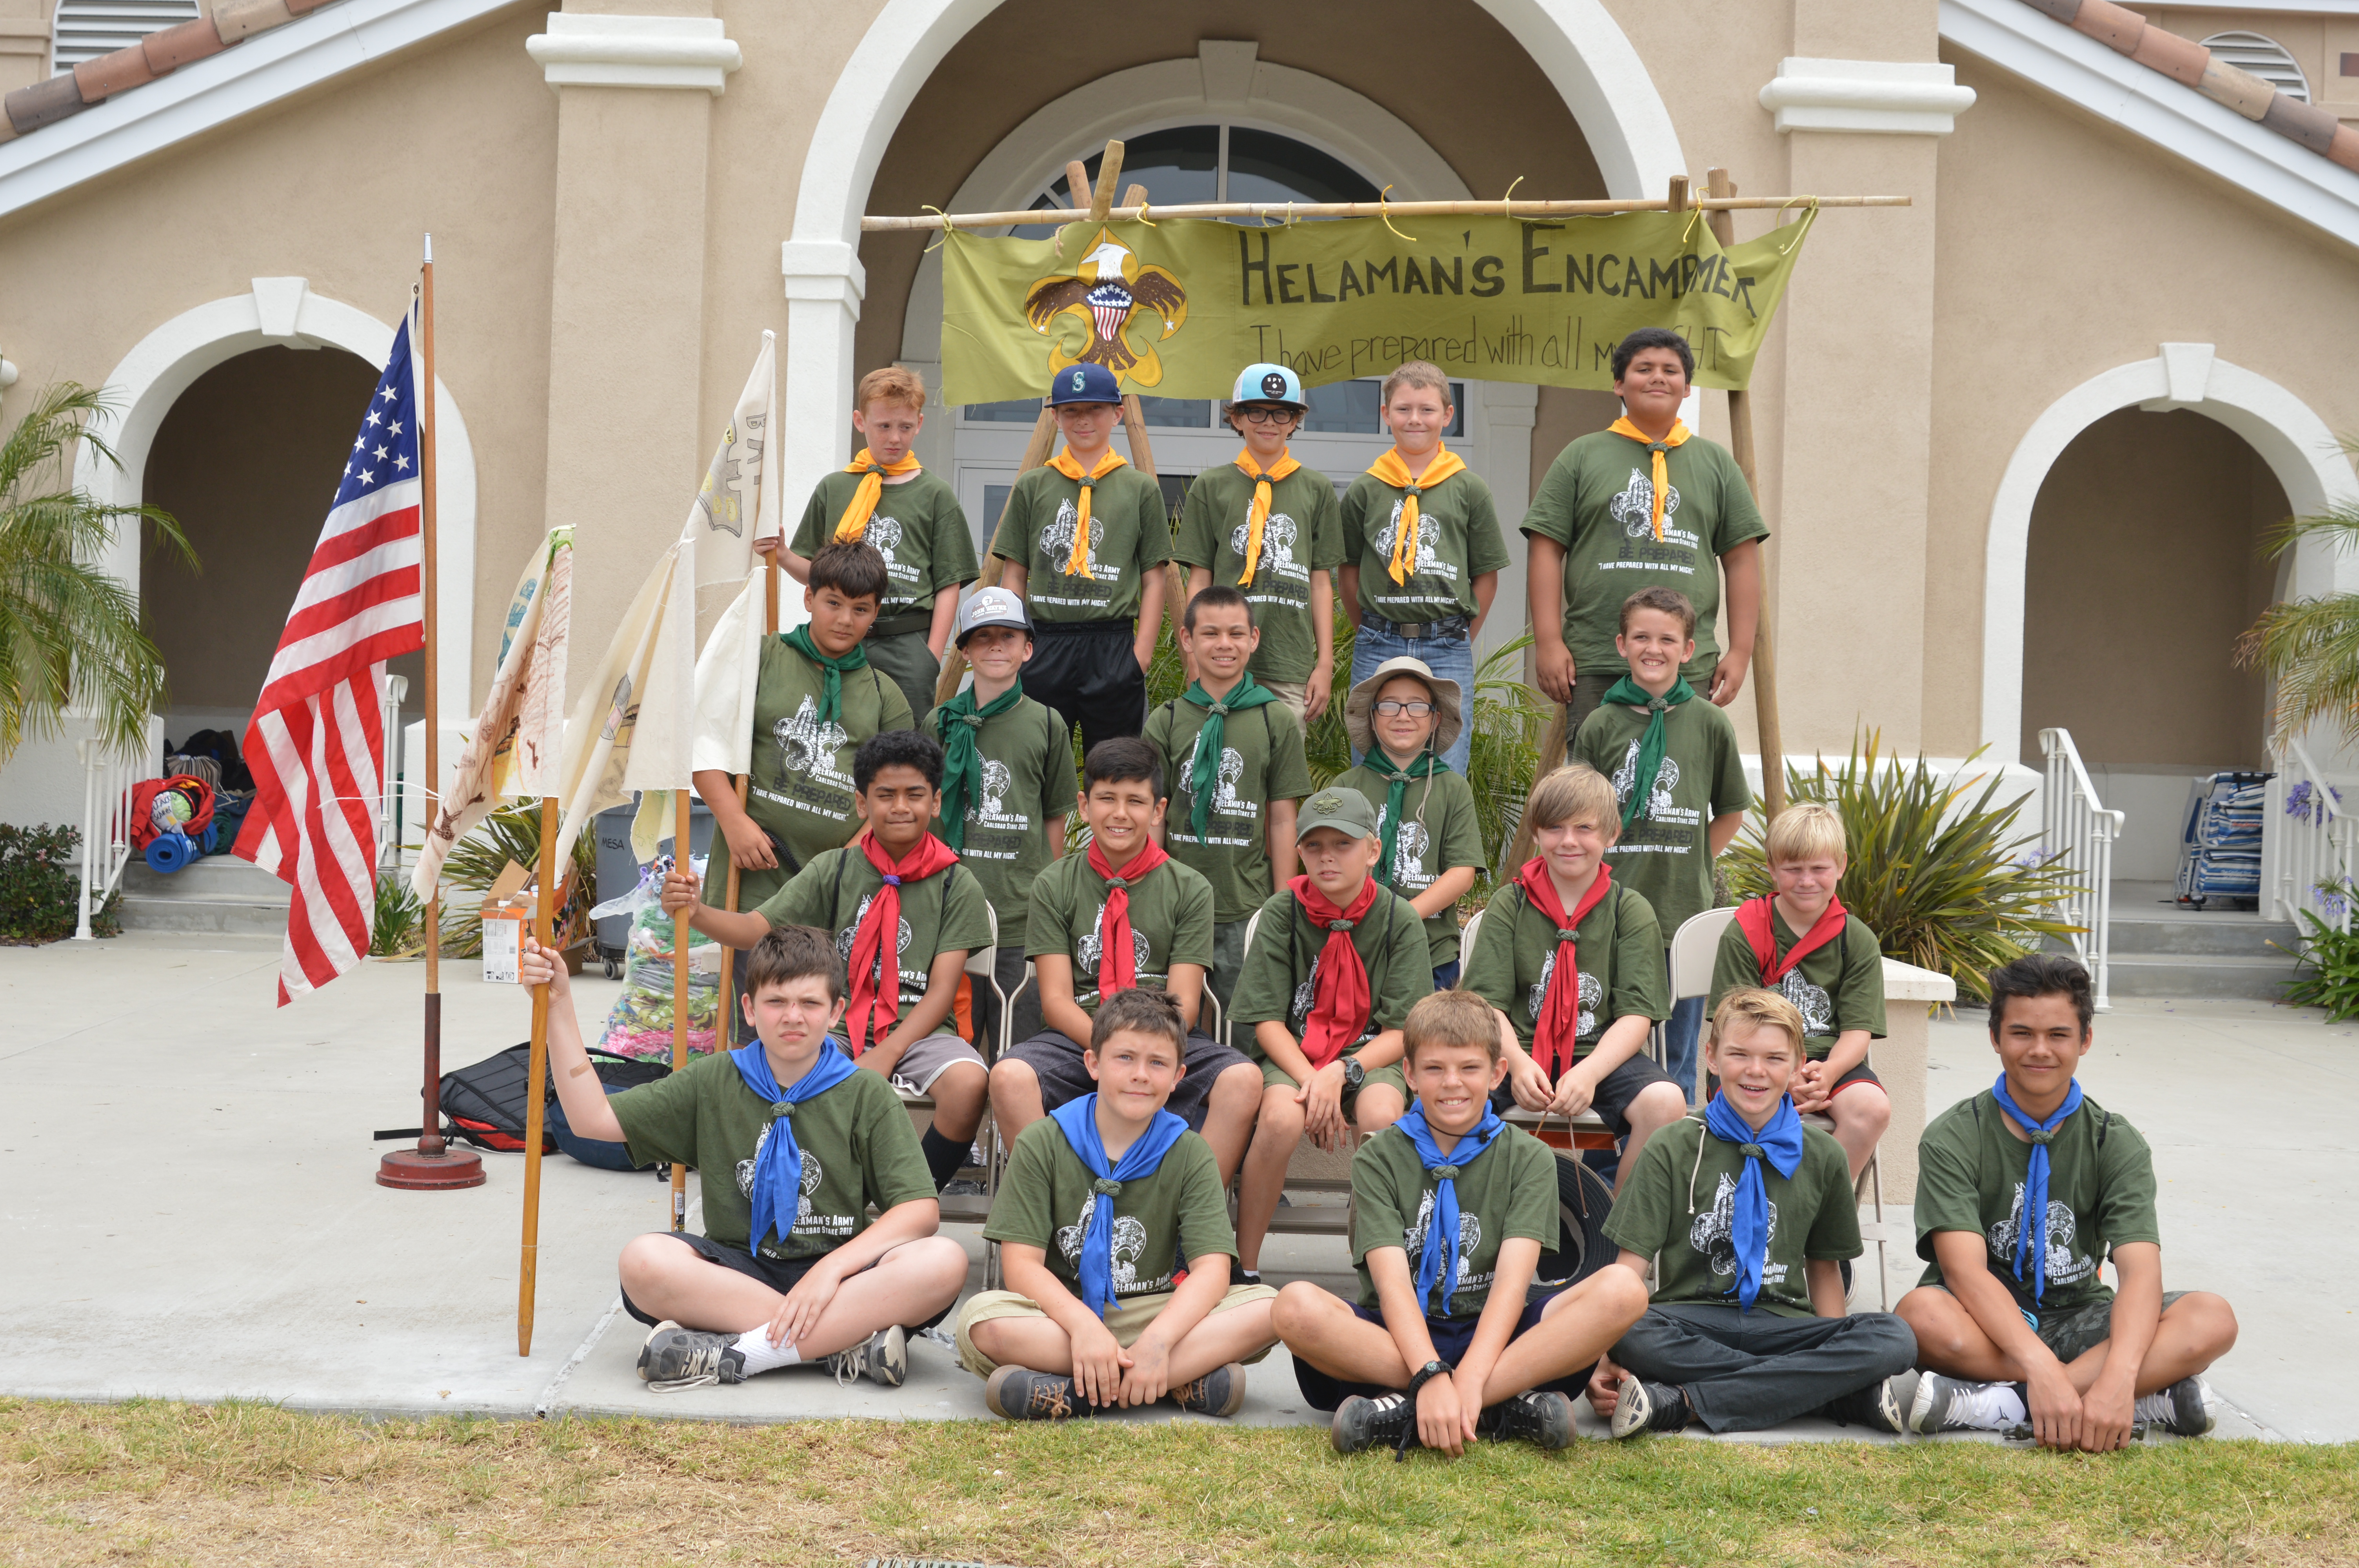 Troop 714 From Oceanside CA Are Pictured Wearing Their Custom ClassB T-shirts At Summer Camp